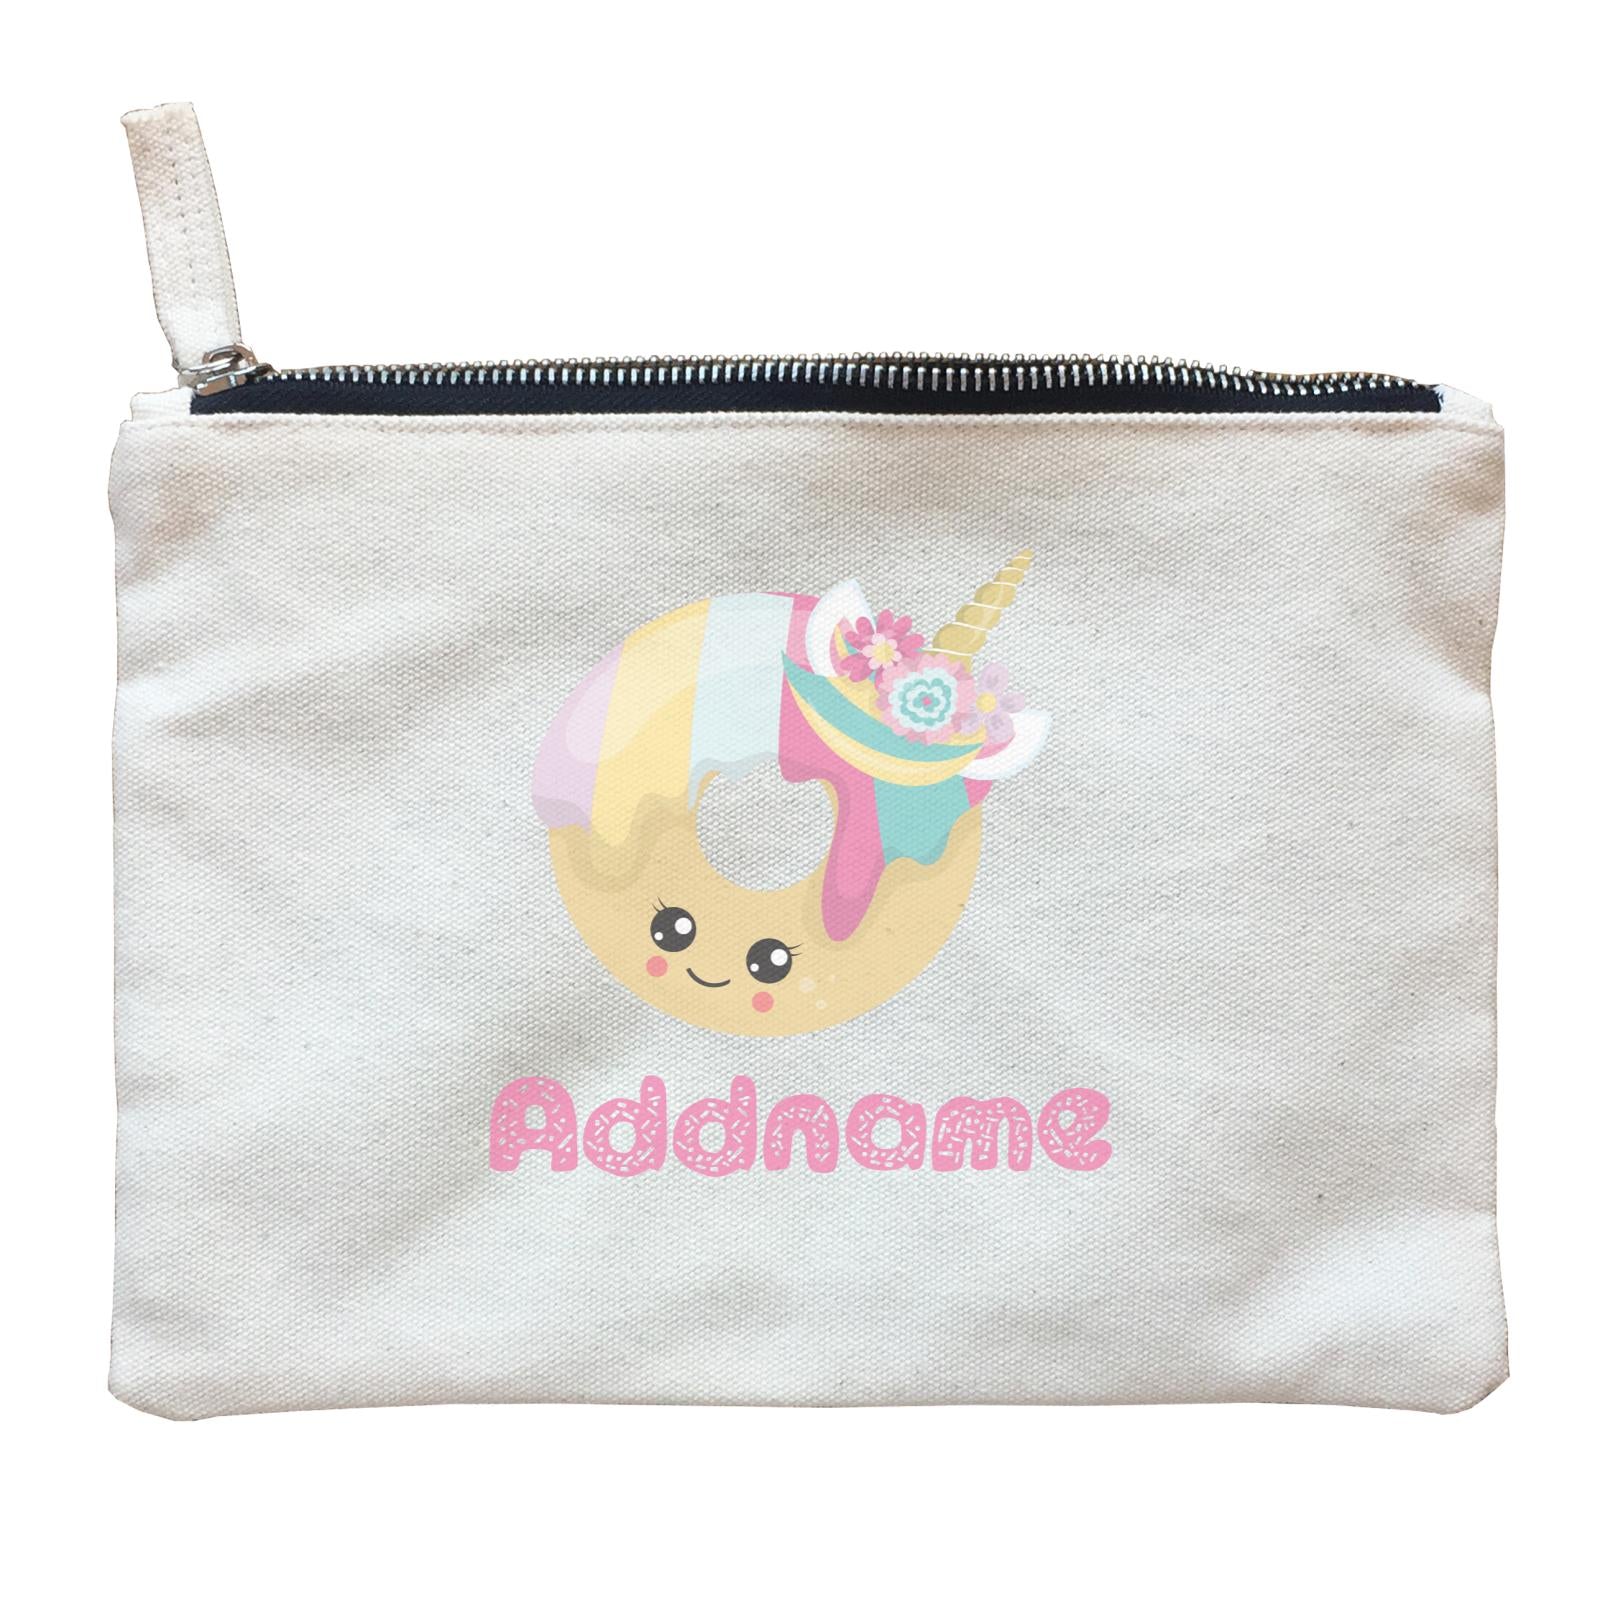 Magical Sweets Unicorn Donut Addname Zipper Pouch